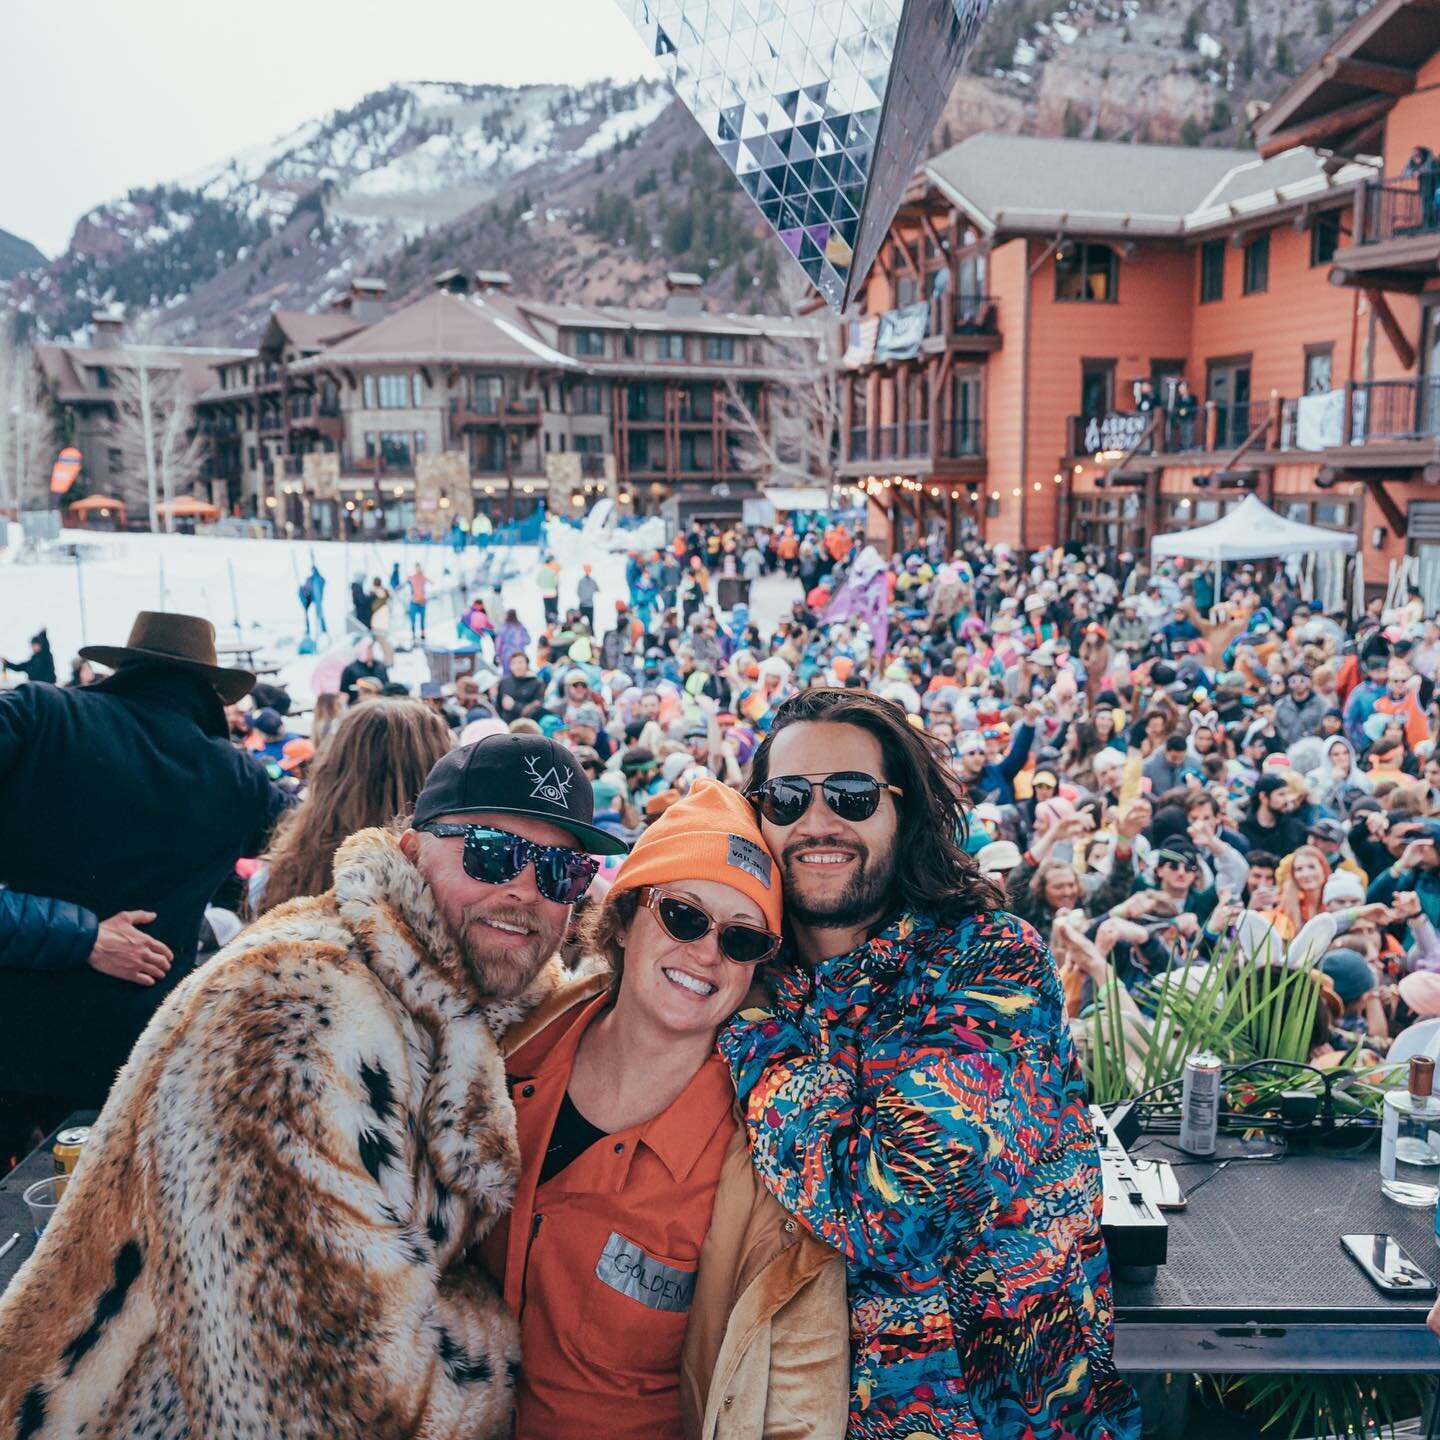 Does it get any wilder than Highlands Closing day??? What an absolute honor it was to play this legendary party🔥🎿🔥 Thank you to everyone involved for all the hard work🙌🏽🙌🏽🙌🏽 📸: @jeffjonesphotography #keepaspenweird #ducktapebeforediamonds #